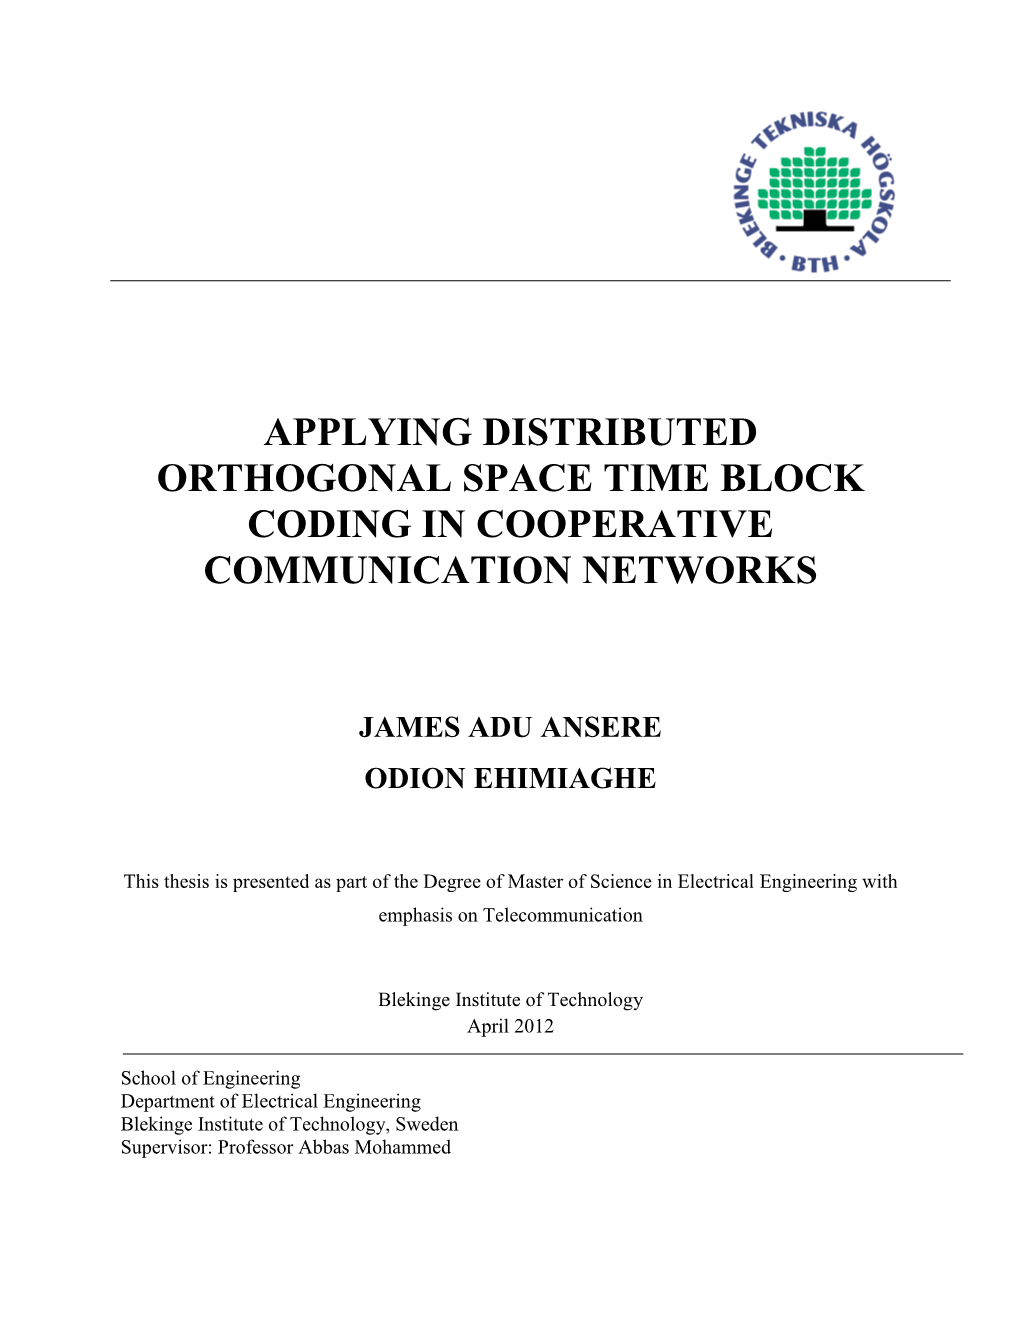 Applying Distributed Orthogonal Space Time Block Coding in Cooperative Communication Networks